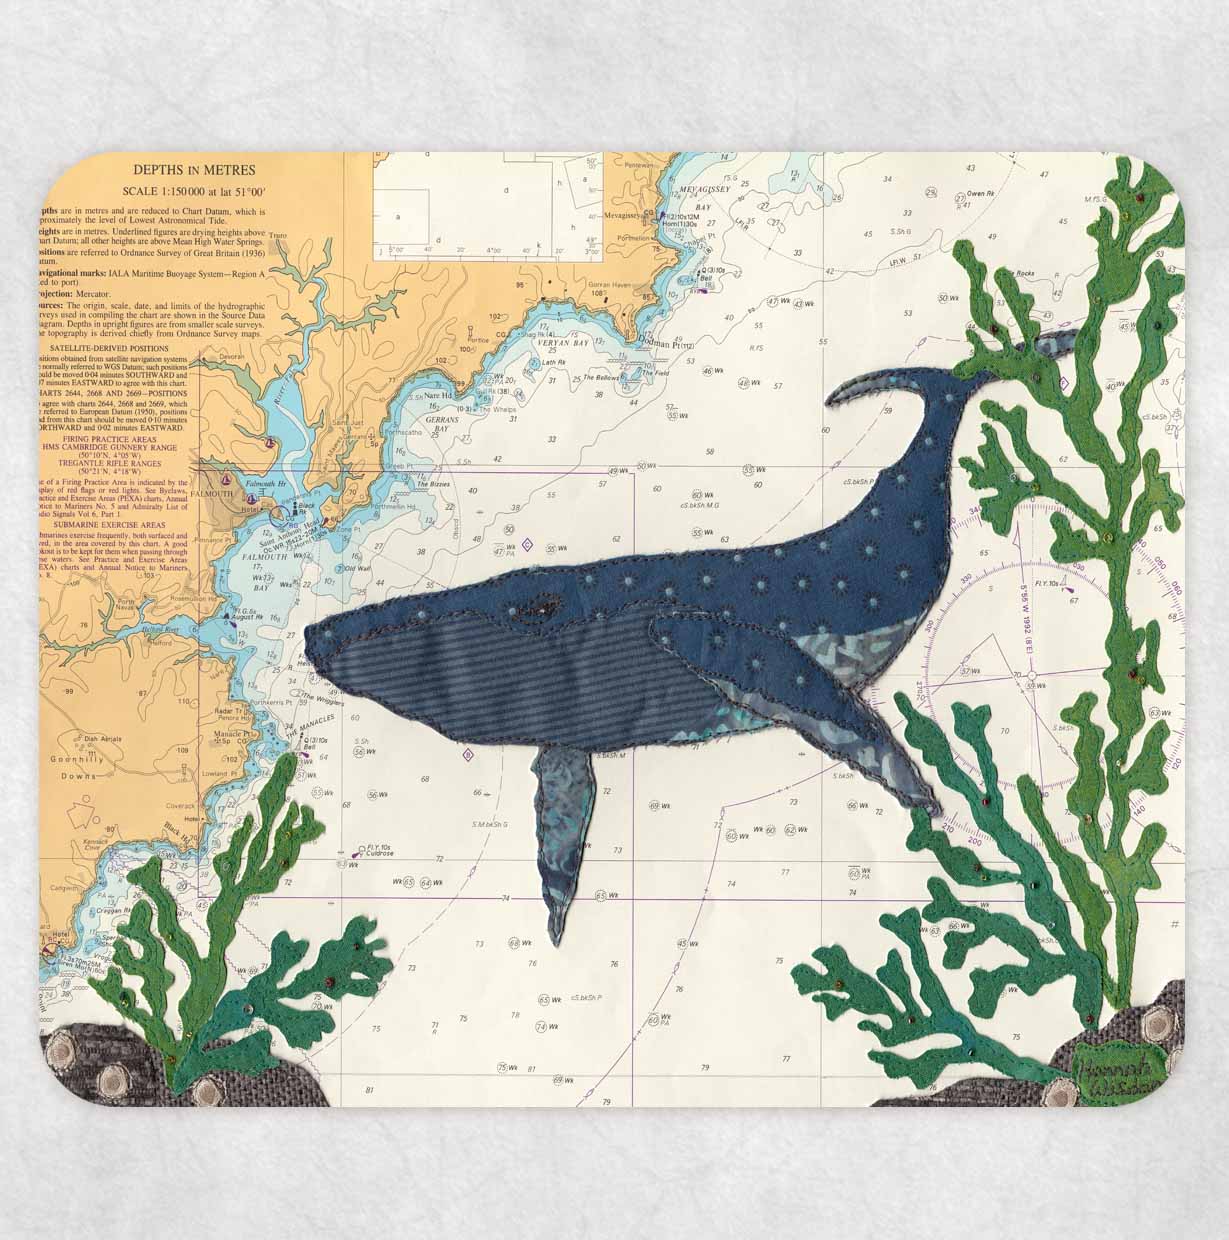 Placemat printed with a textile art design of a whale on an old sea chart